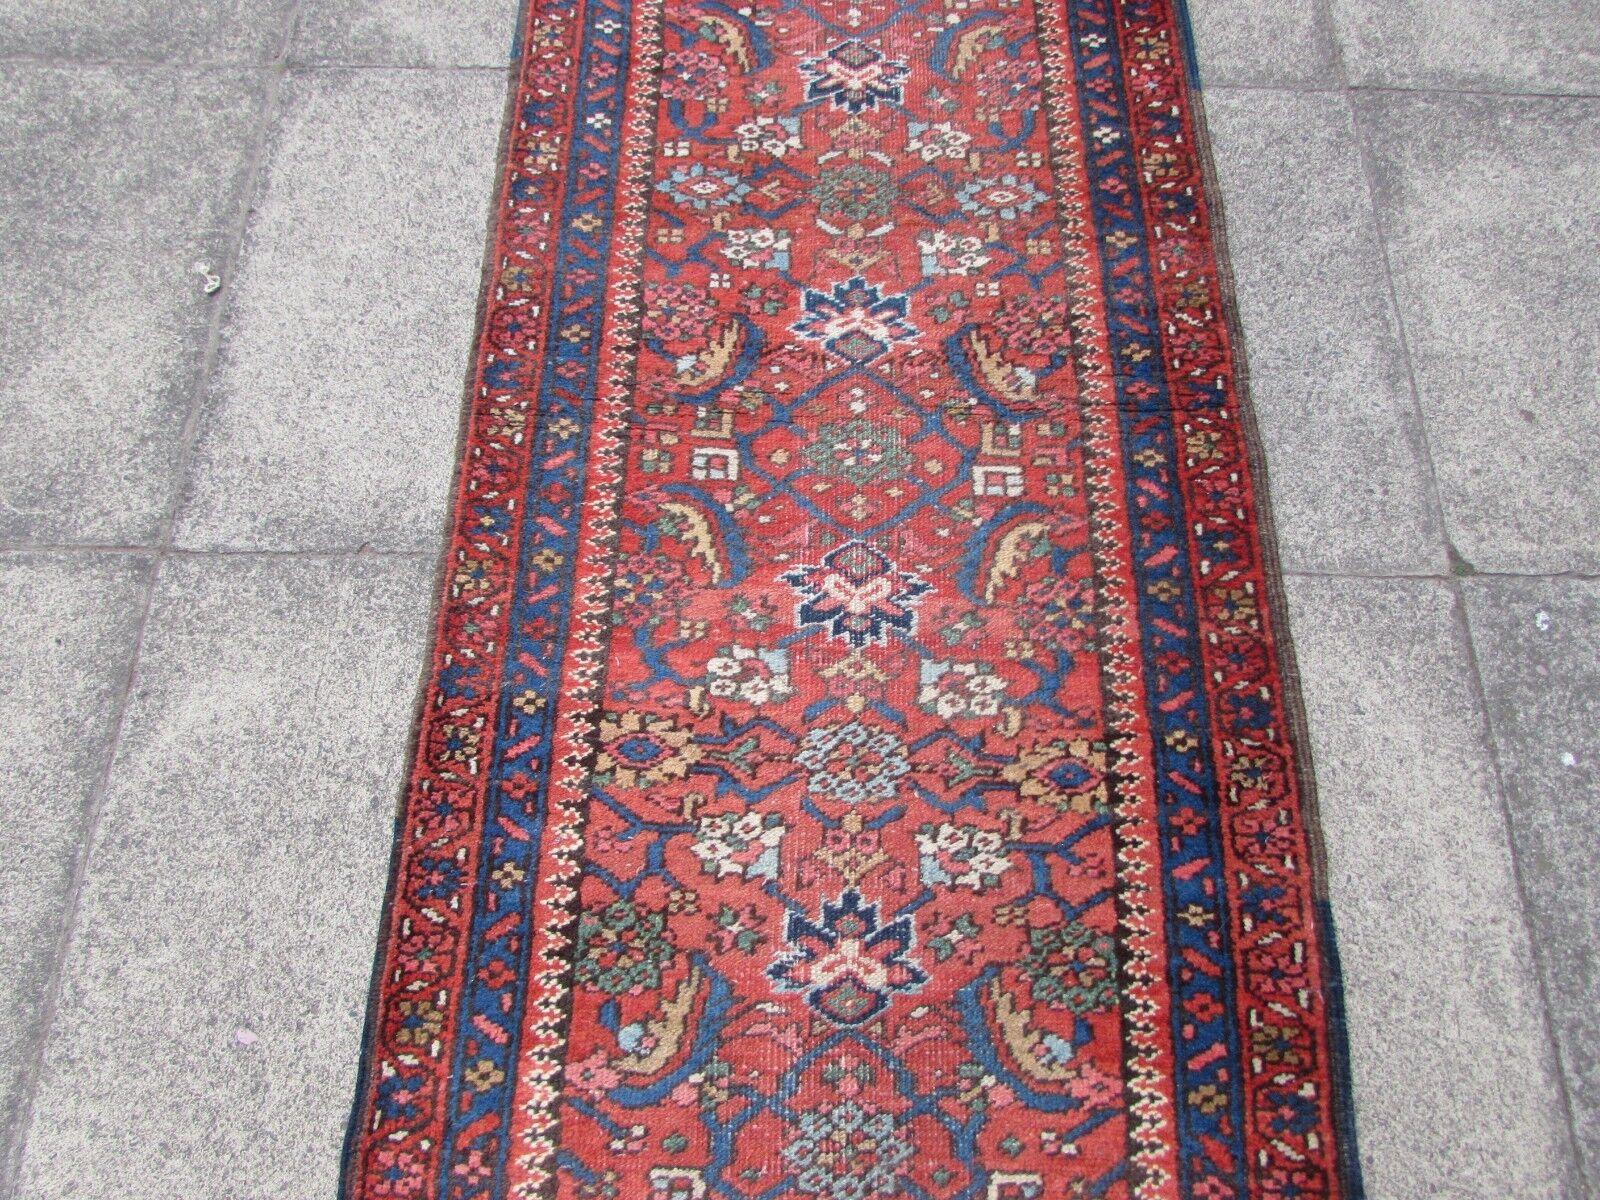 French Handmade Antique Persian Style Mahal Runner Rug 2.5' x 12.1', 1920s, 1Q57 For Sale